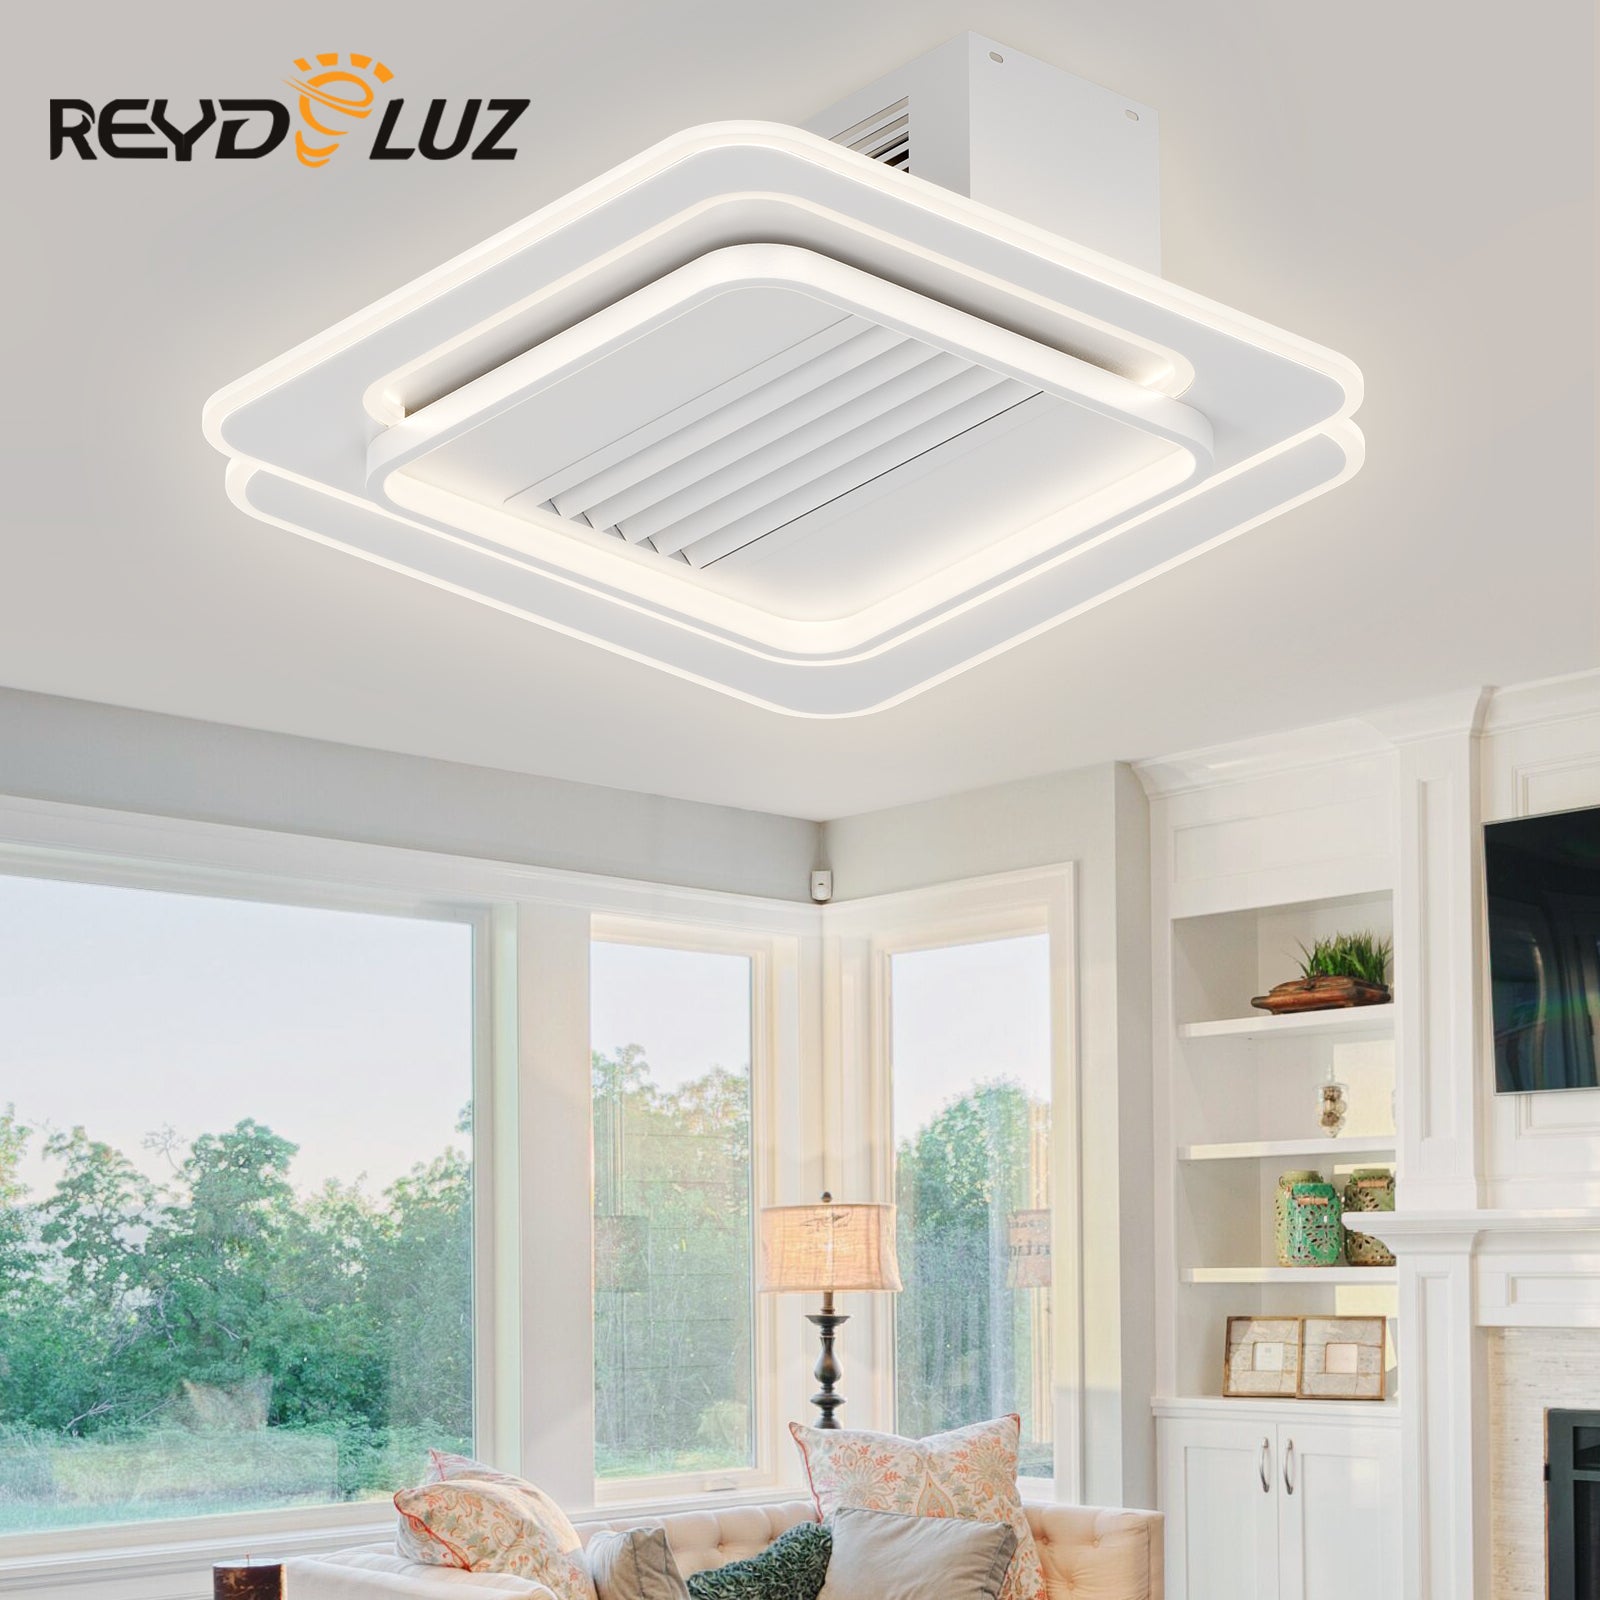 REYDELUZ Modern Ceiling Fans with Lights and Remote, 22in Low Profile Ceiling Fan Flush Mount, 3000K-6500K Dimmable Bladeless LED Fan Light, Ceiling Fans with Lights for Bedroom